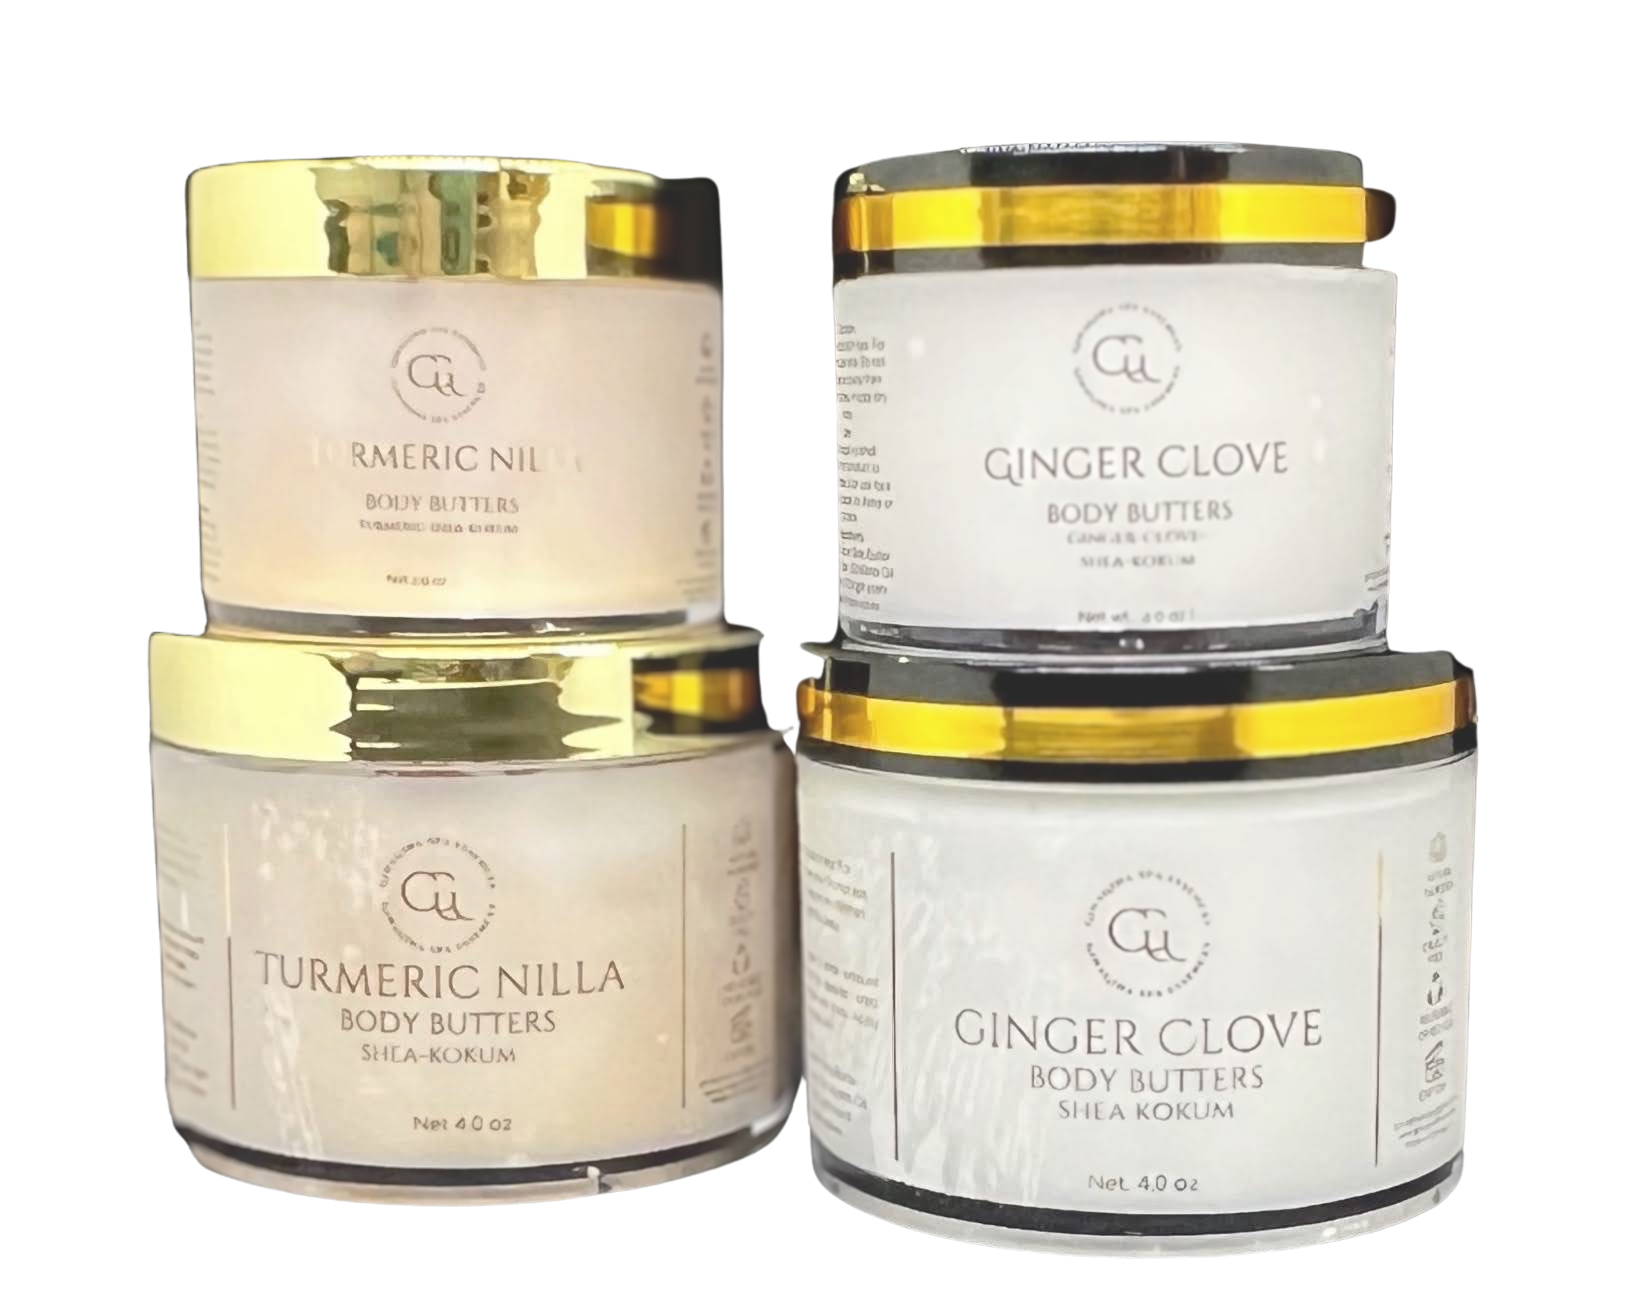 Pamper your skin with the luxurious Face & Body Butters, made with hand-crafted Shea and Kokum butters to help keep your skins look and feel. Soothe your senses with the exotic aromas of either  Sweet Ginger Clove or Turmeric Nilla, and enjoy the benefits designed to deeply hydrate and pamper your complexion with a refreshing, lightly scented with a gold finish.